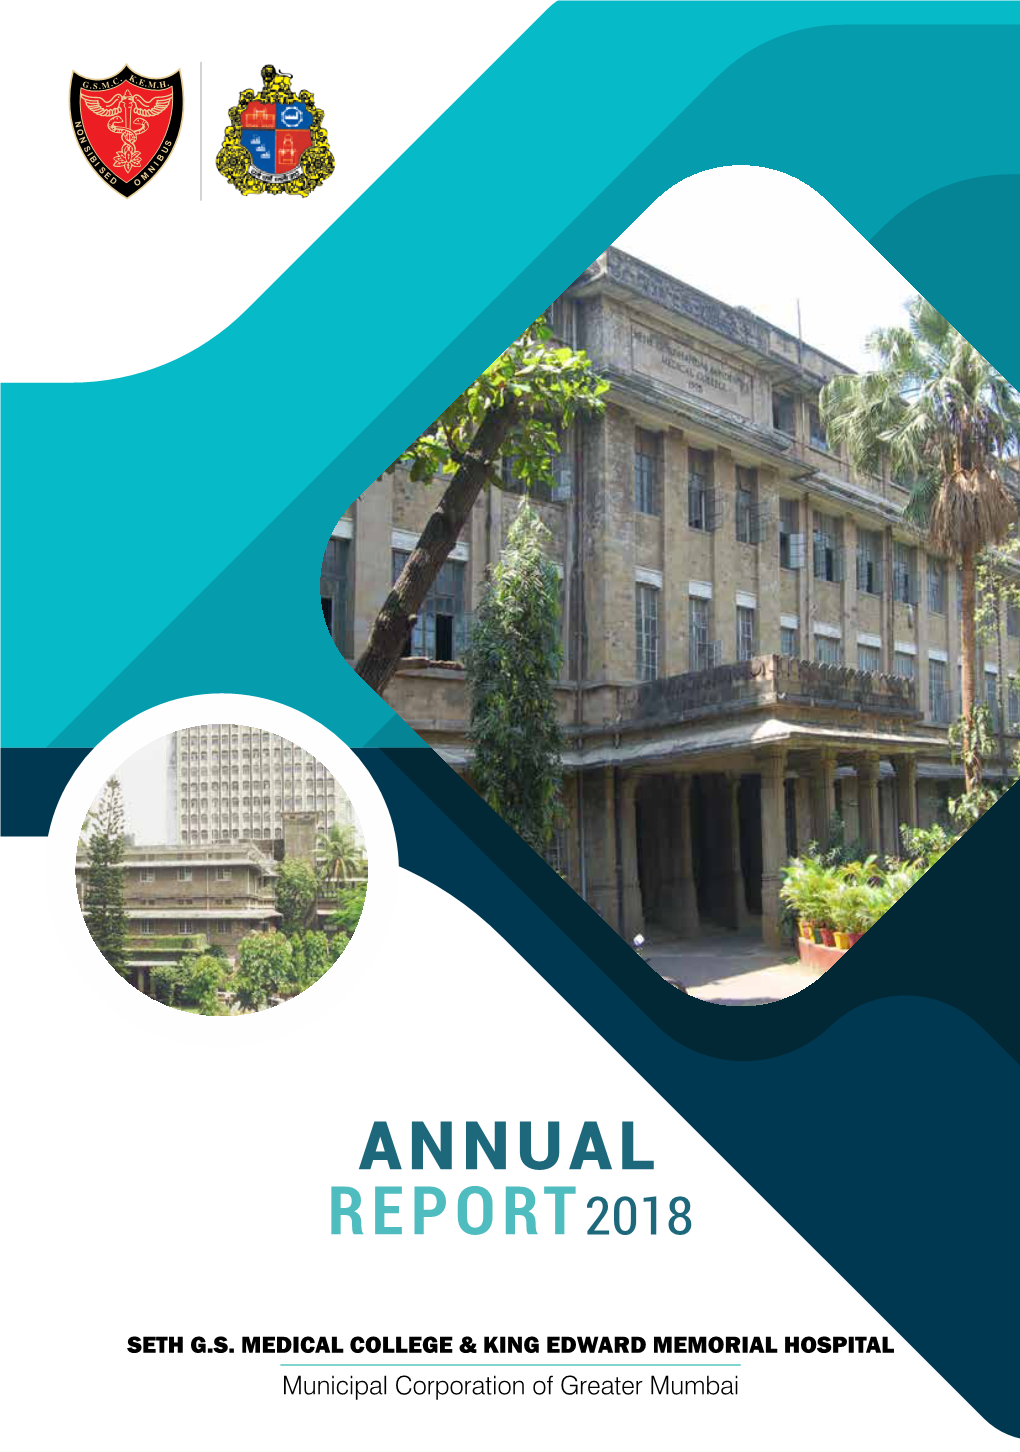 ANNUAL REPORT 2018 Concept (Front & Back Cover) Dr